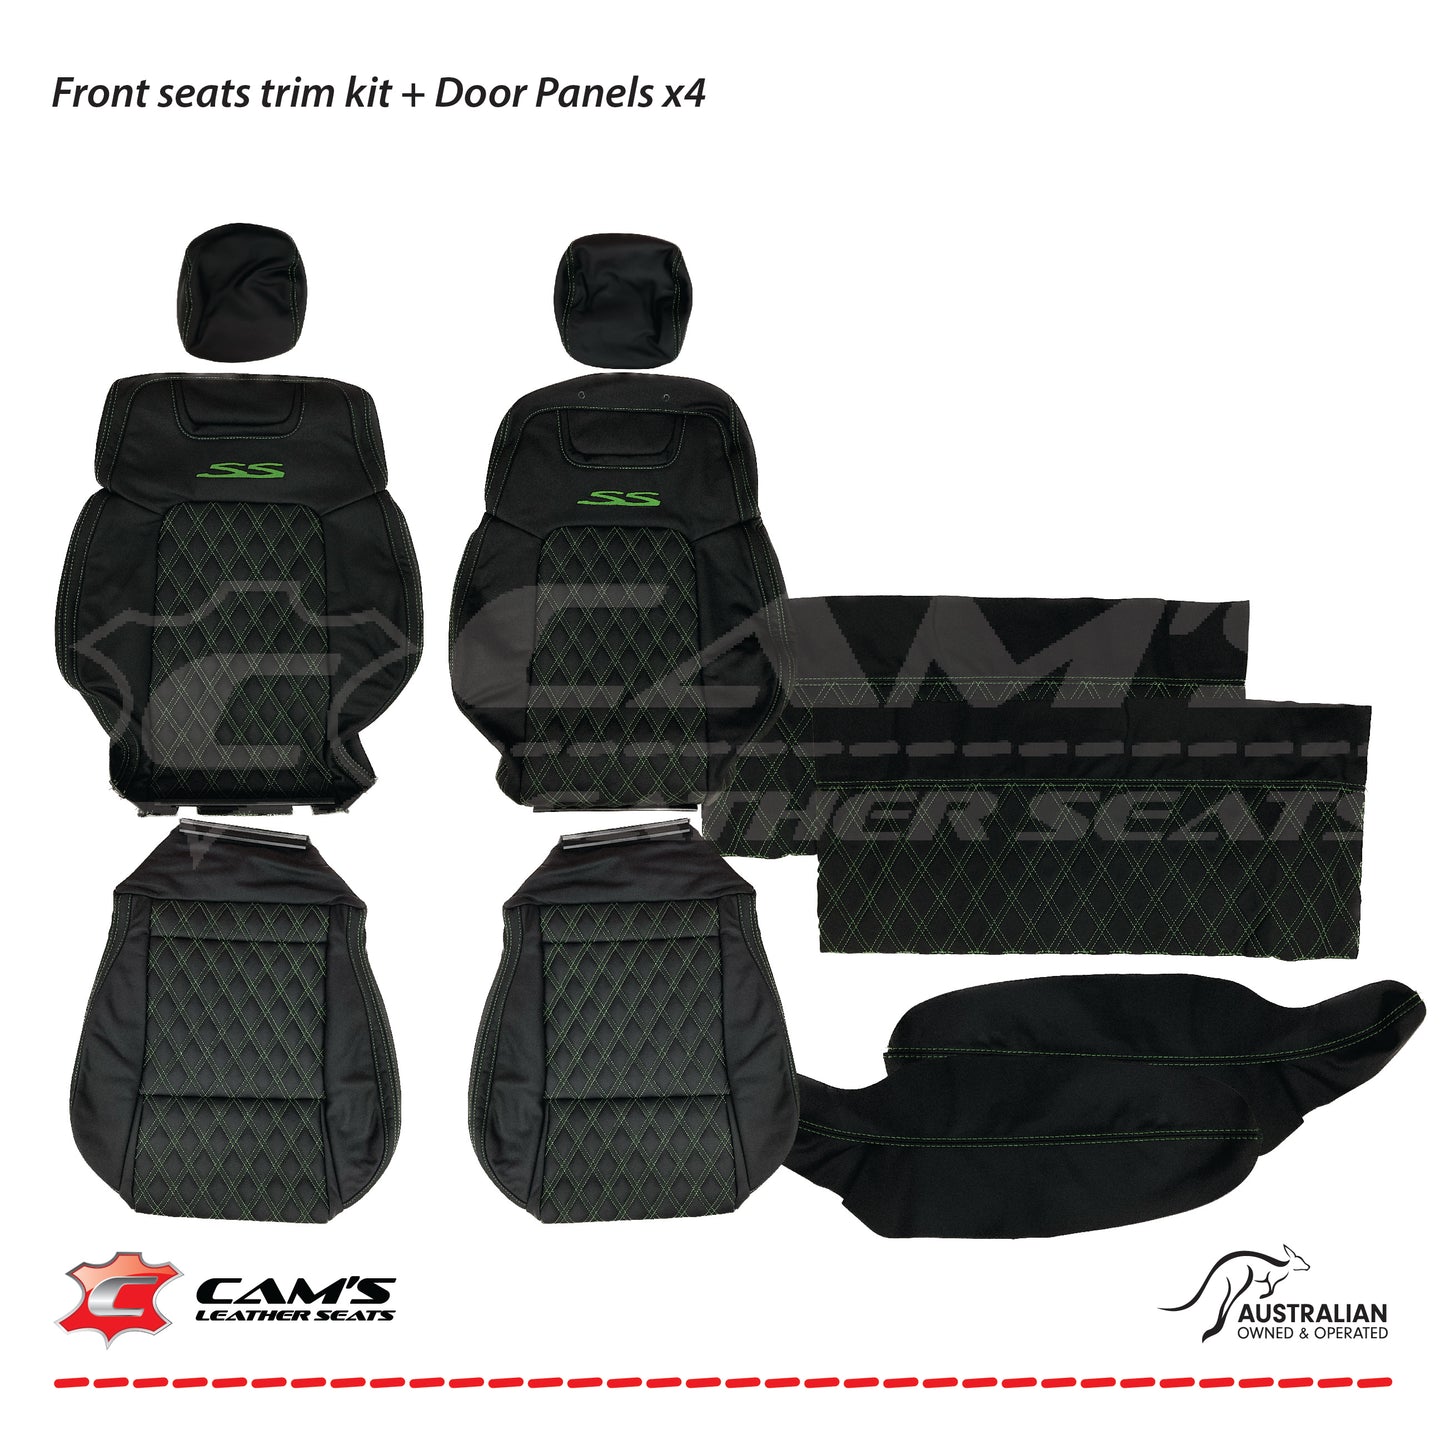 LEATHER SEATS TRIM KIT FOR HOLDEN VE SS UTE BLACK WITH GREEN STITCHING